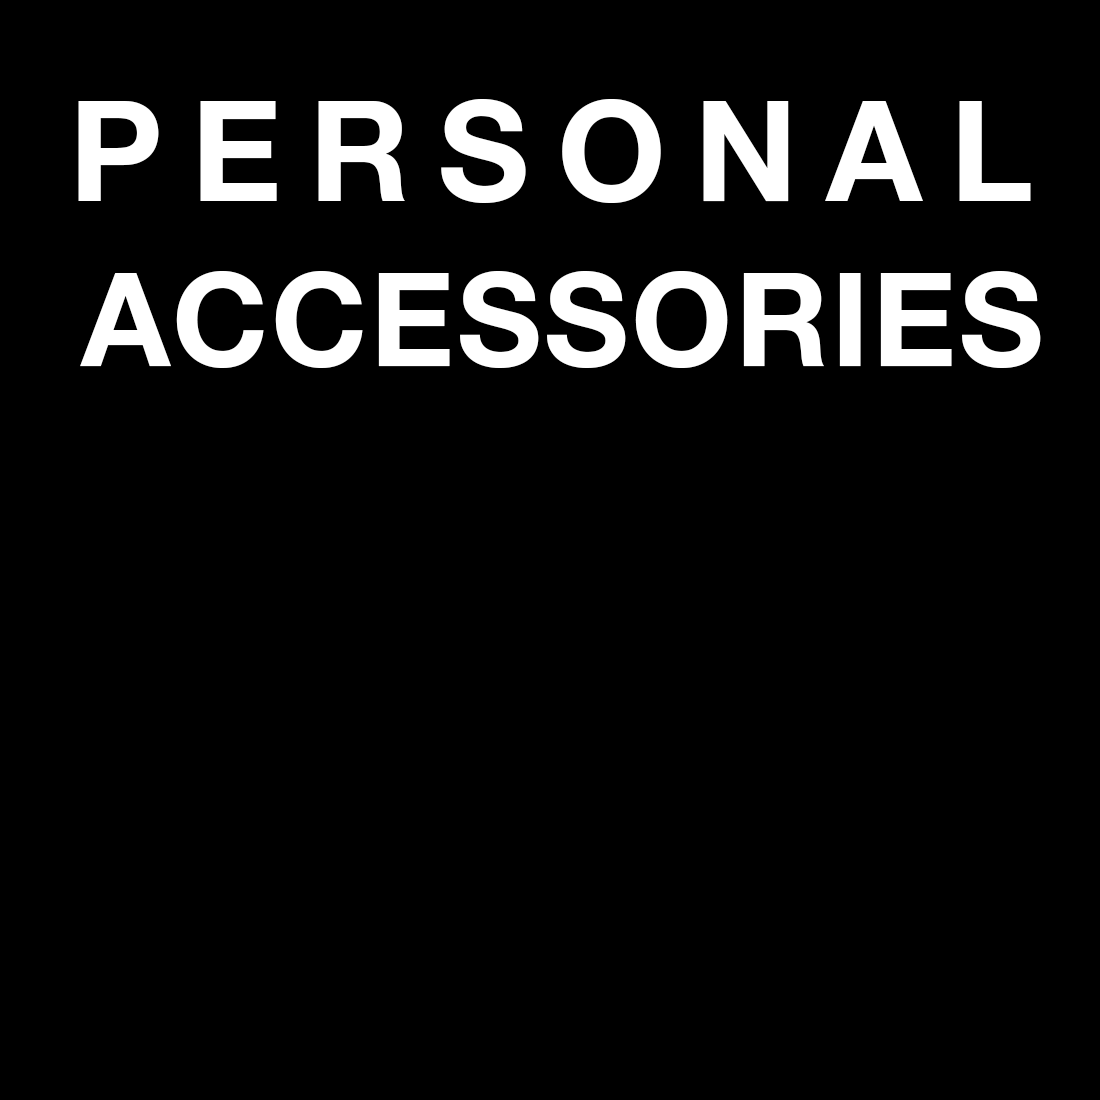 PERSONAL ACCESSORIES